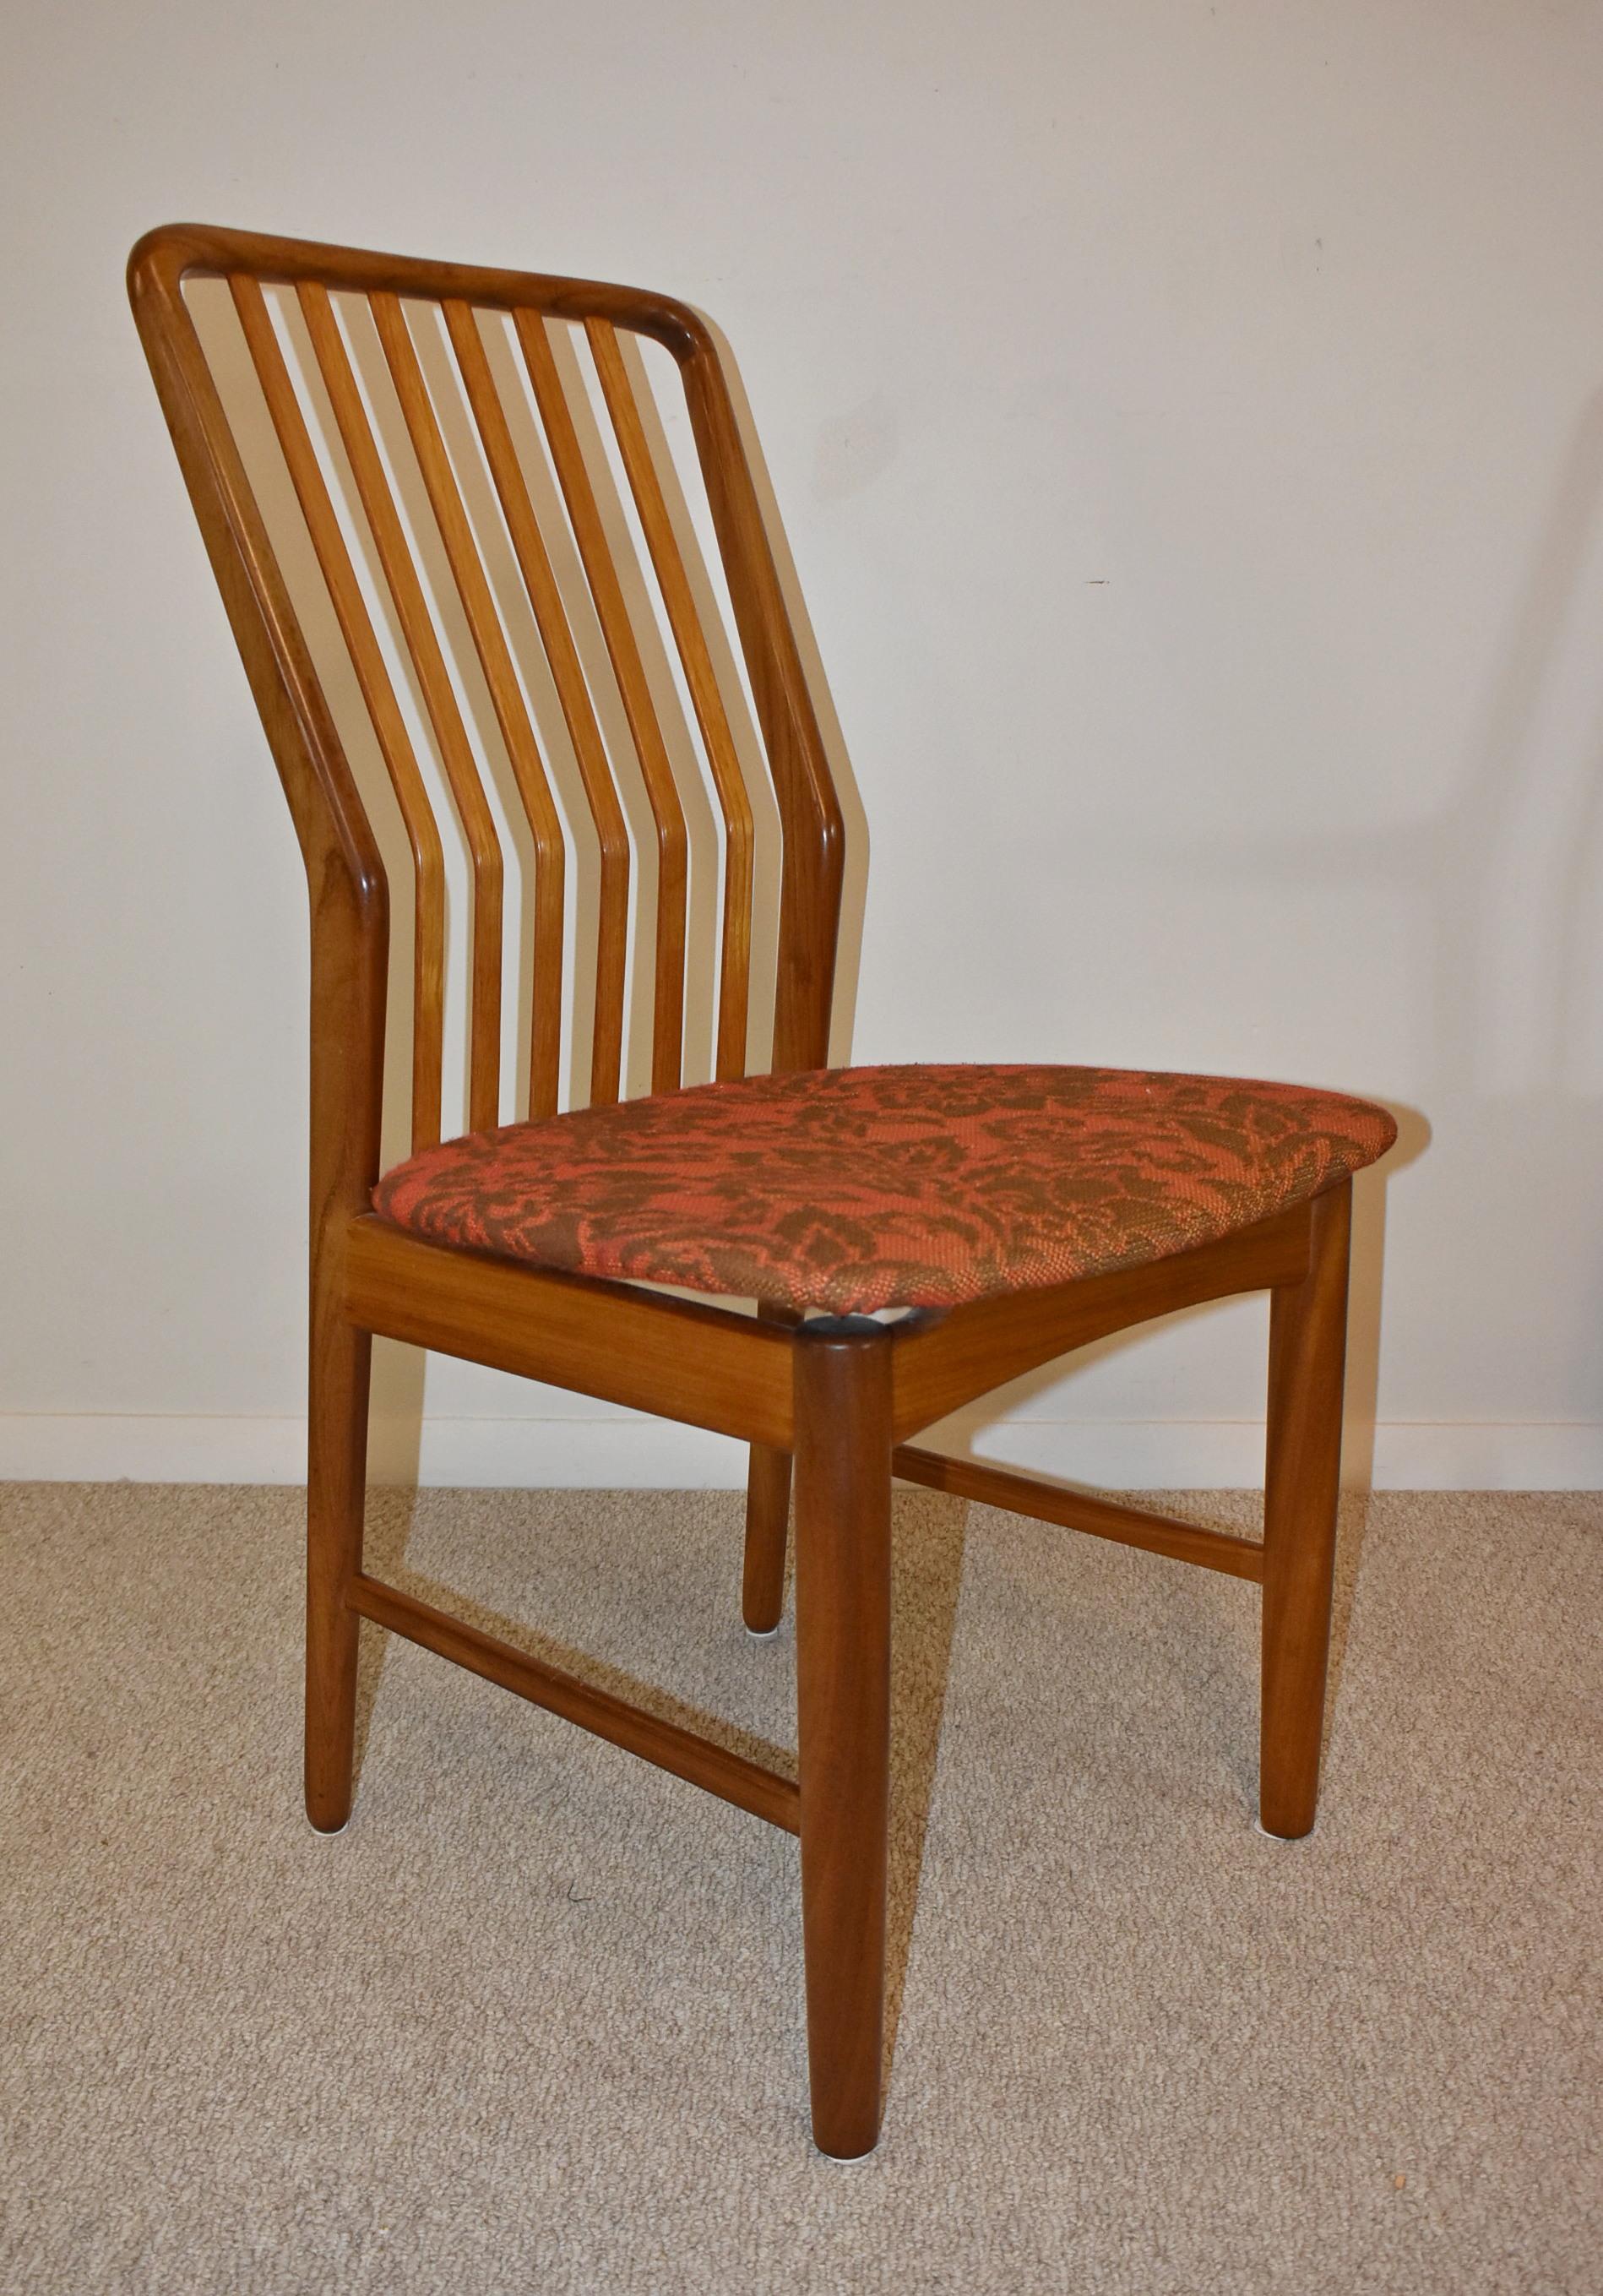 Eight teak Danish dining chairs by Svend Madsen for Moreddi. Removeable floating seats. Very nice condition circa 1960's. Arm chair measures 24' wide x 23